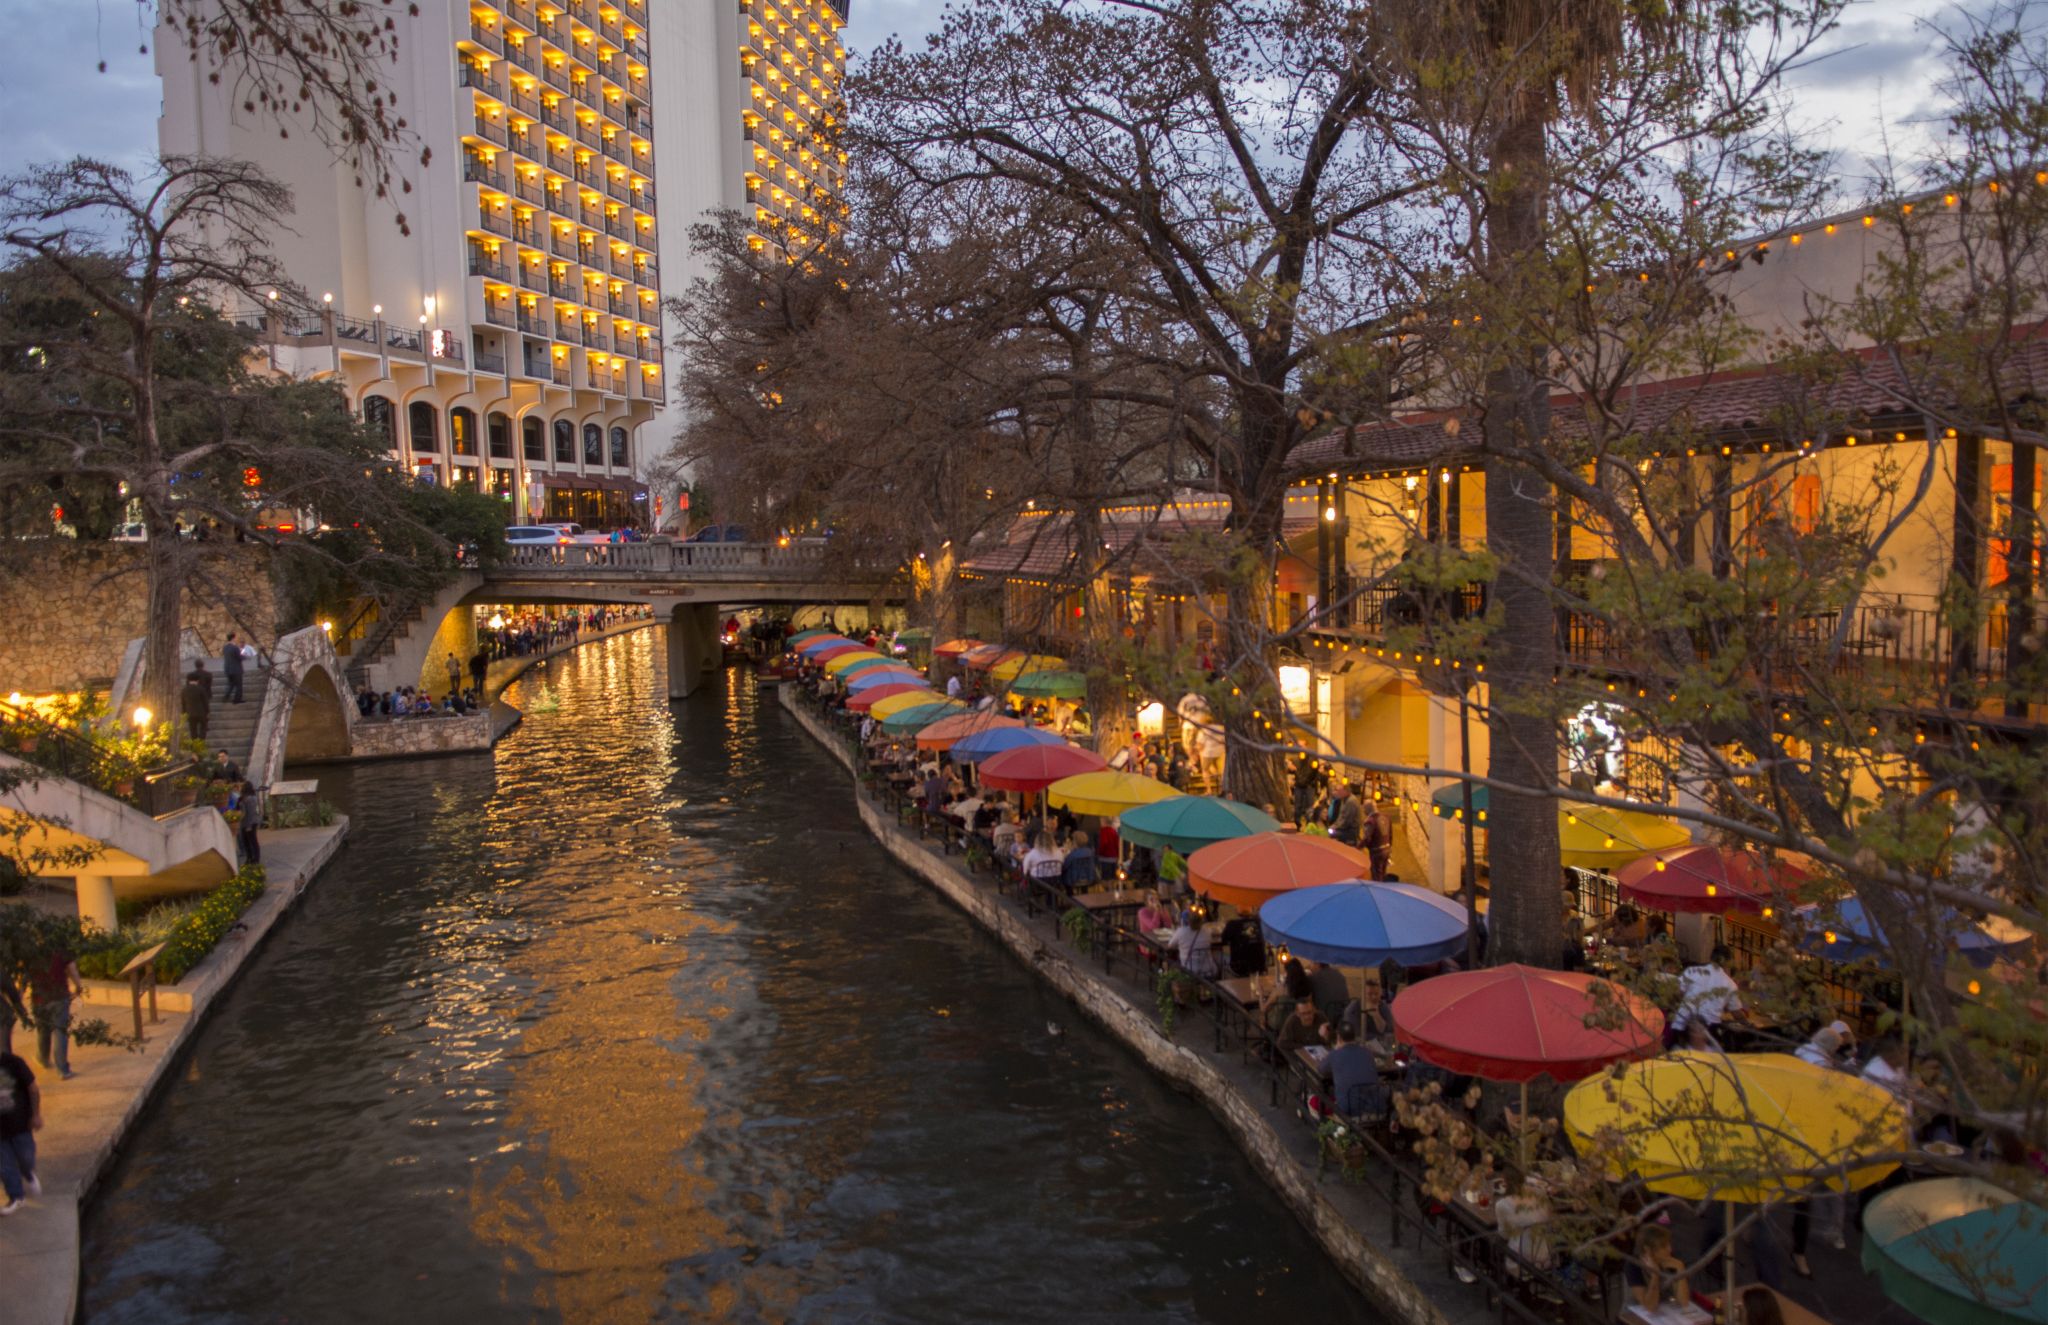 Forbes recognizes San Antonio as one of the best US cities to retire